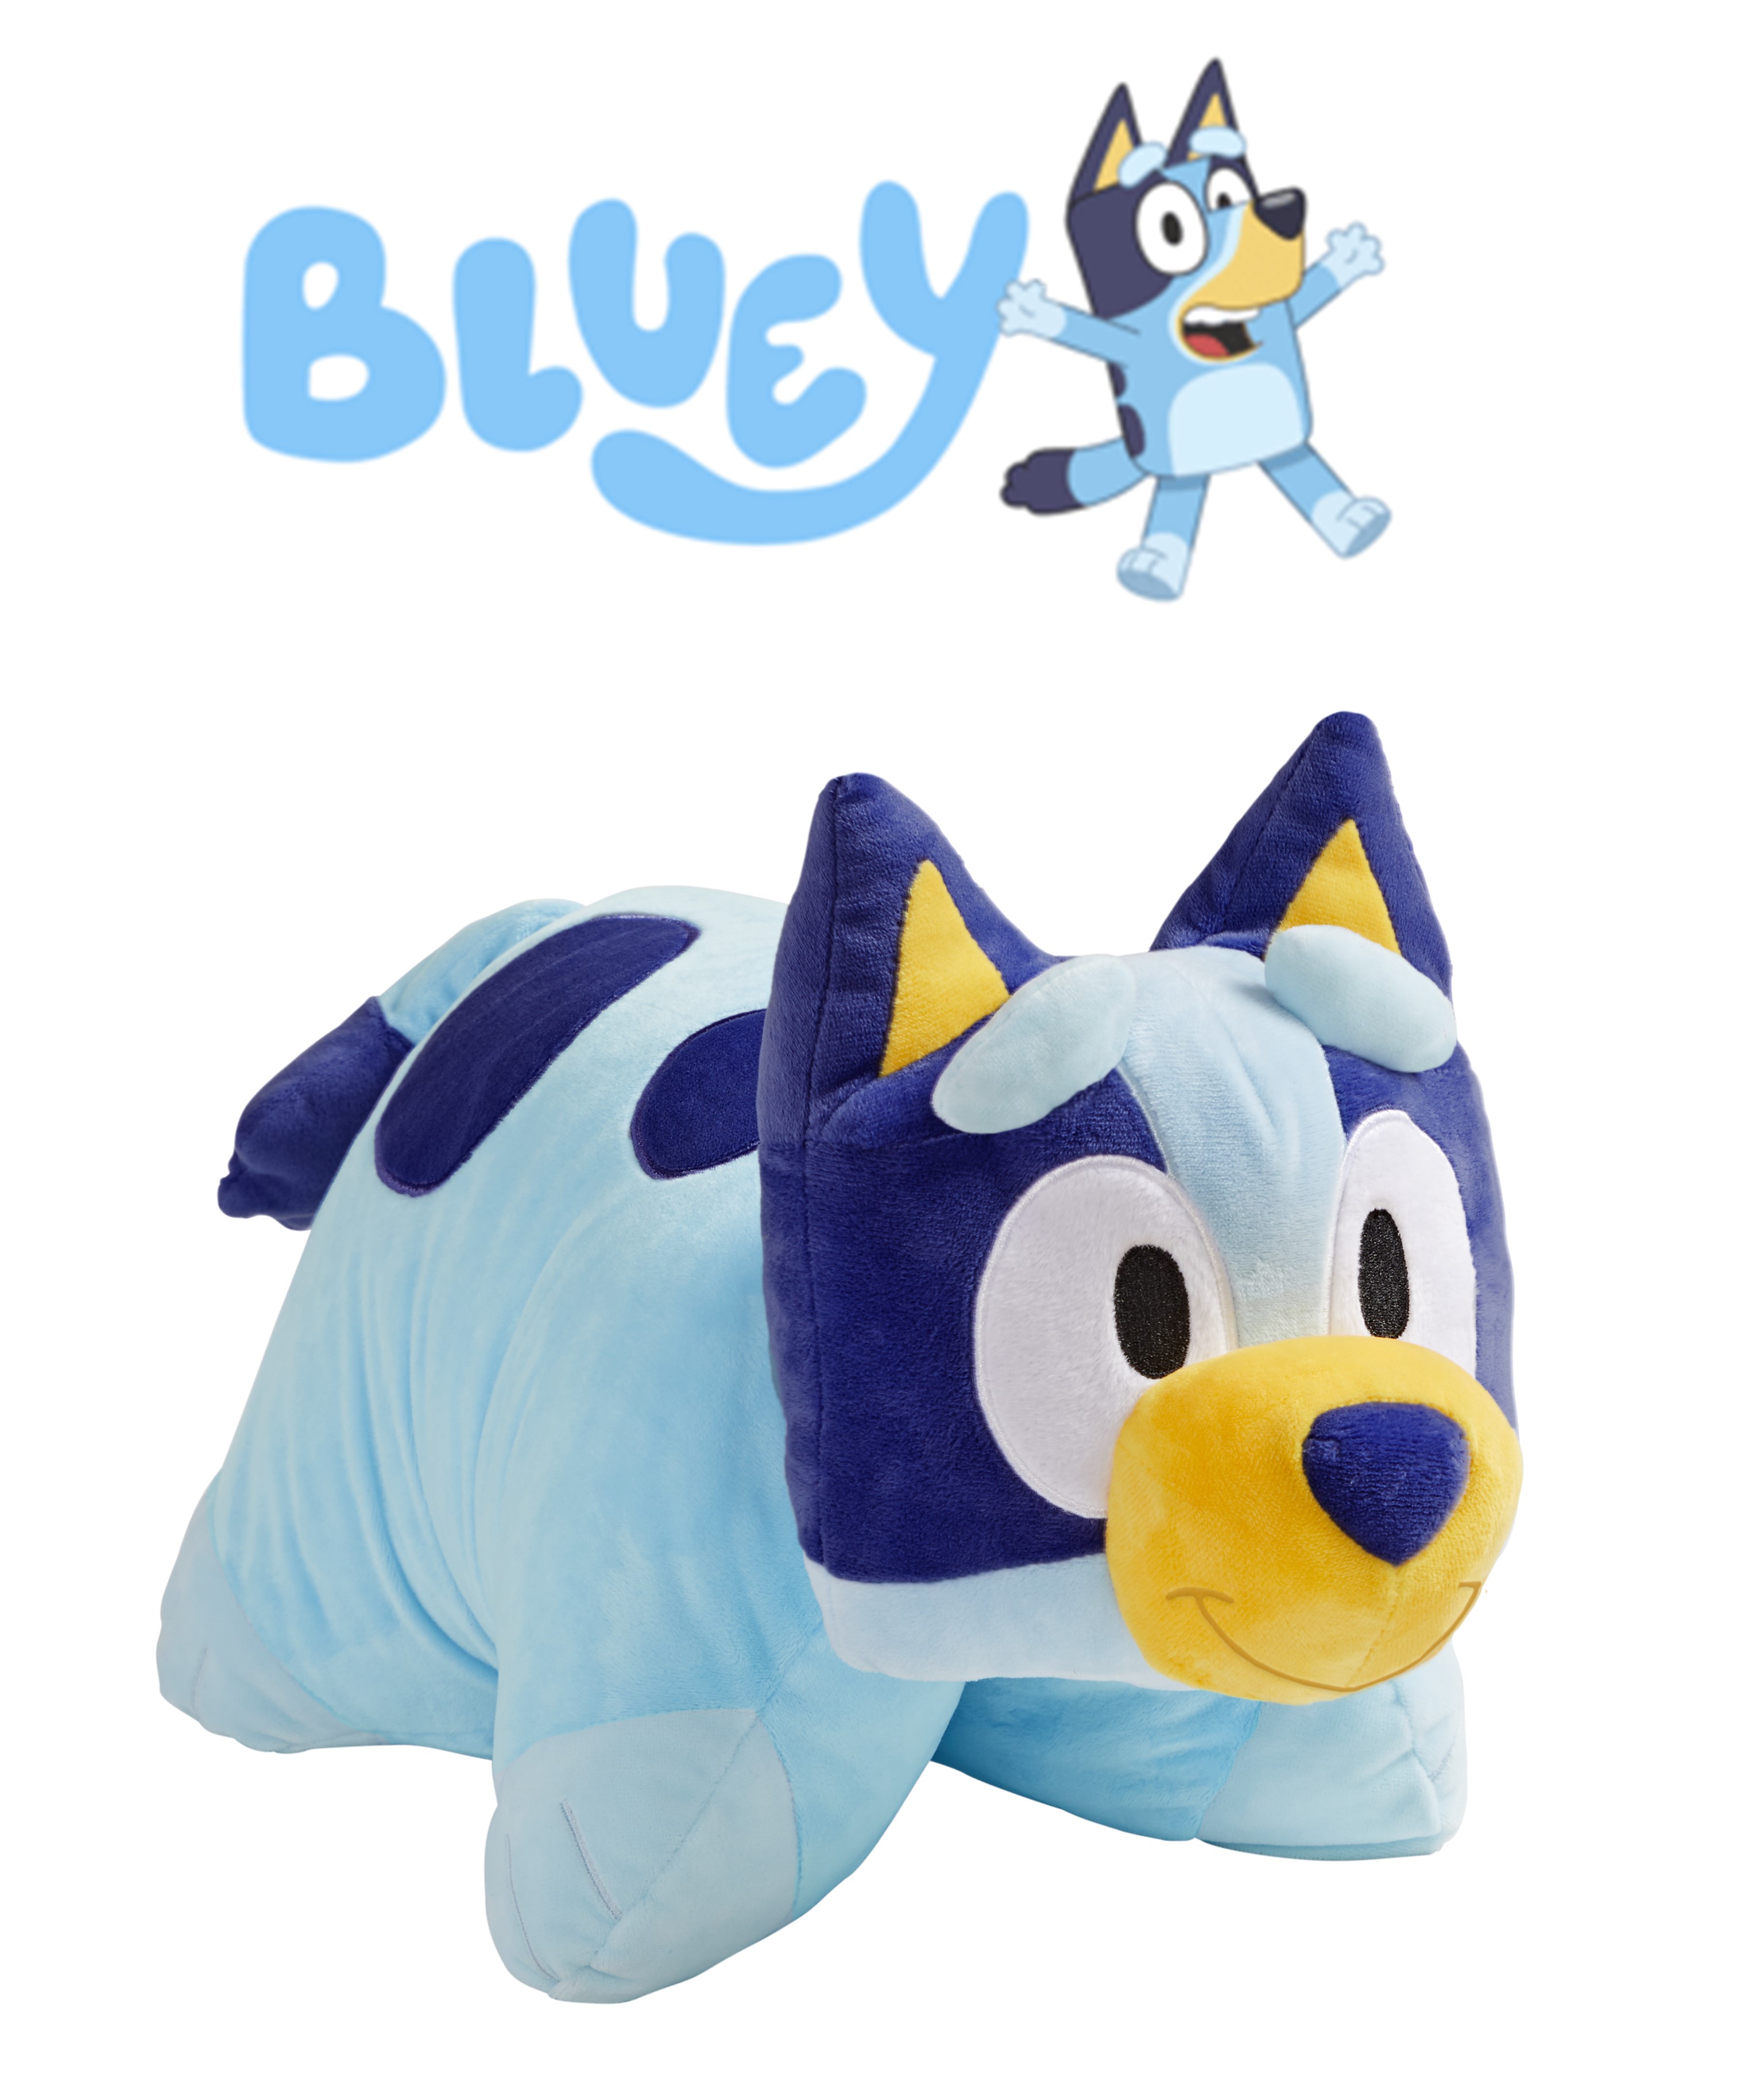 Click here to view Bluey Pillow Pets.